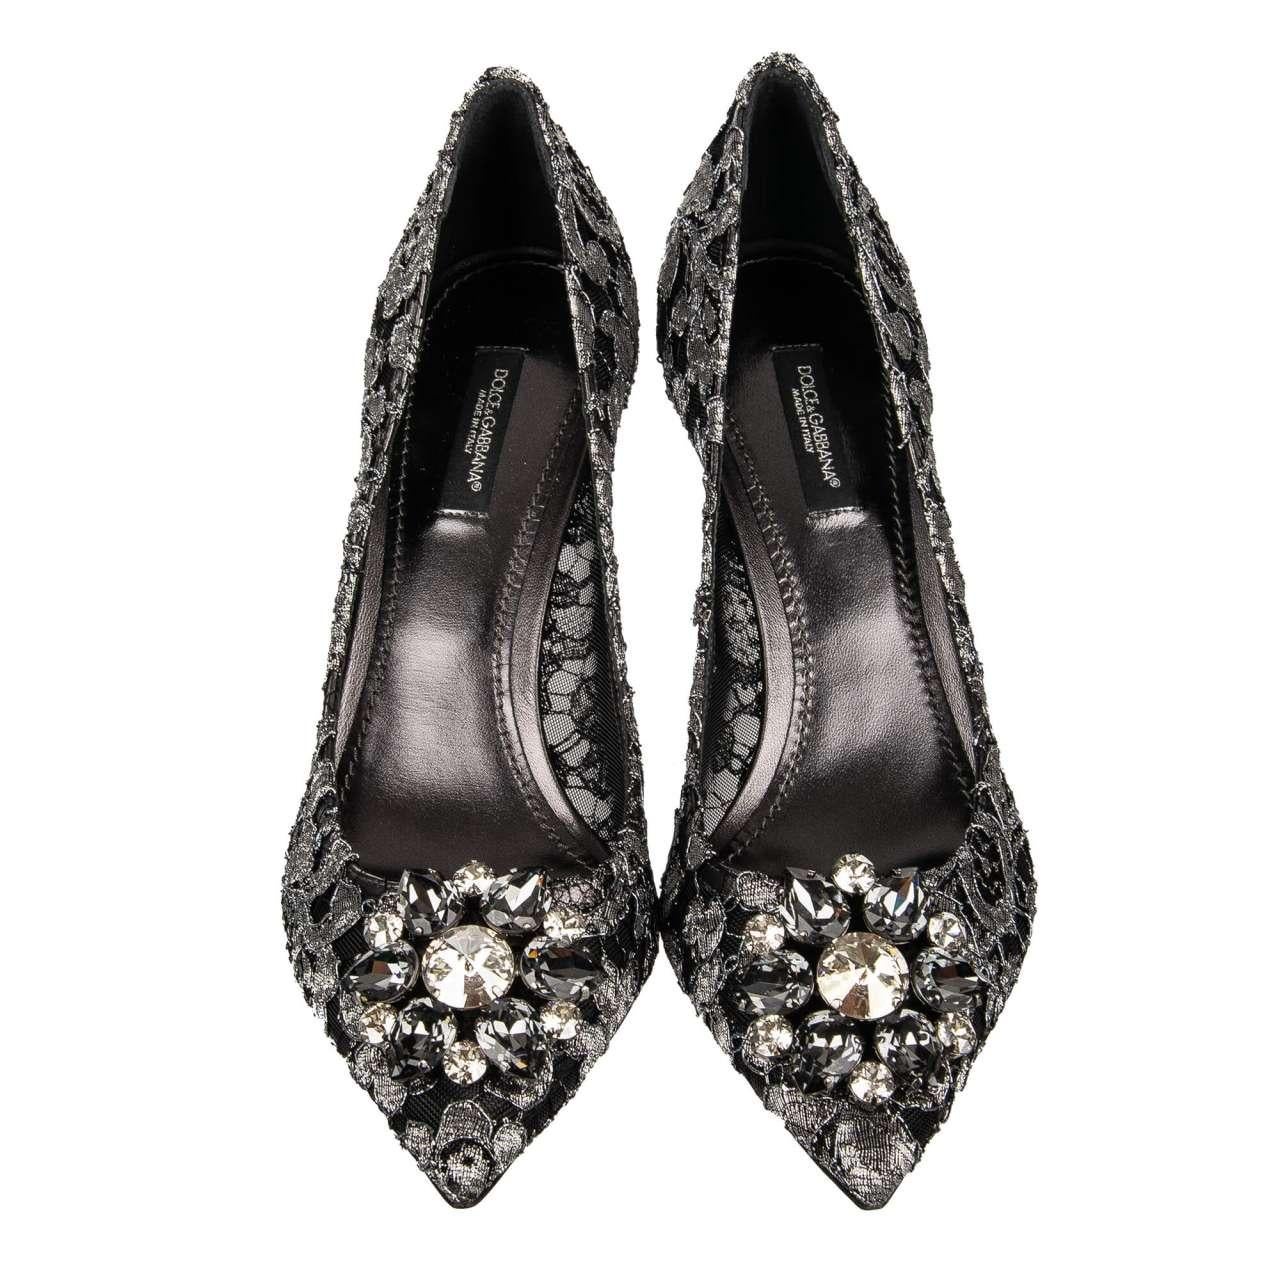 - Taormina lace pointed Pumps BELLUCCI with crystals brooch in silver and black by DOLCE & GABBANA - New with Box - MADE IN ITALY - Former RRP: EUR 695 - Crystals brooch in front - Model: CD0066-AE637-87505 - Material: 52% Rayon, 38% Lambskin, 10%